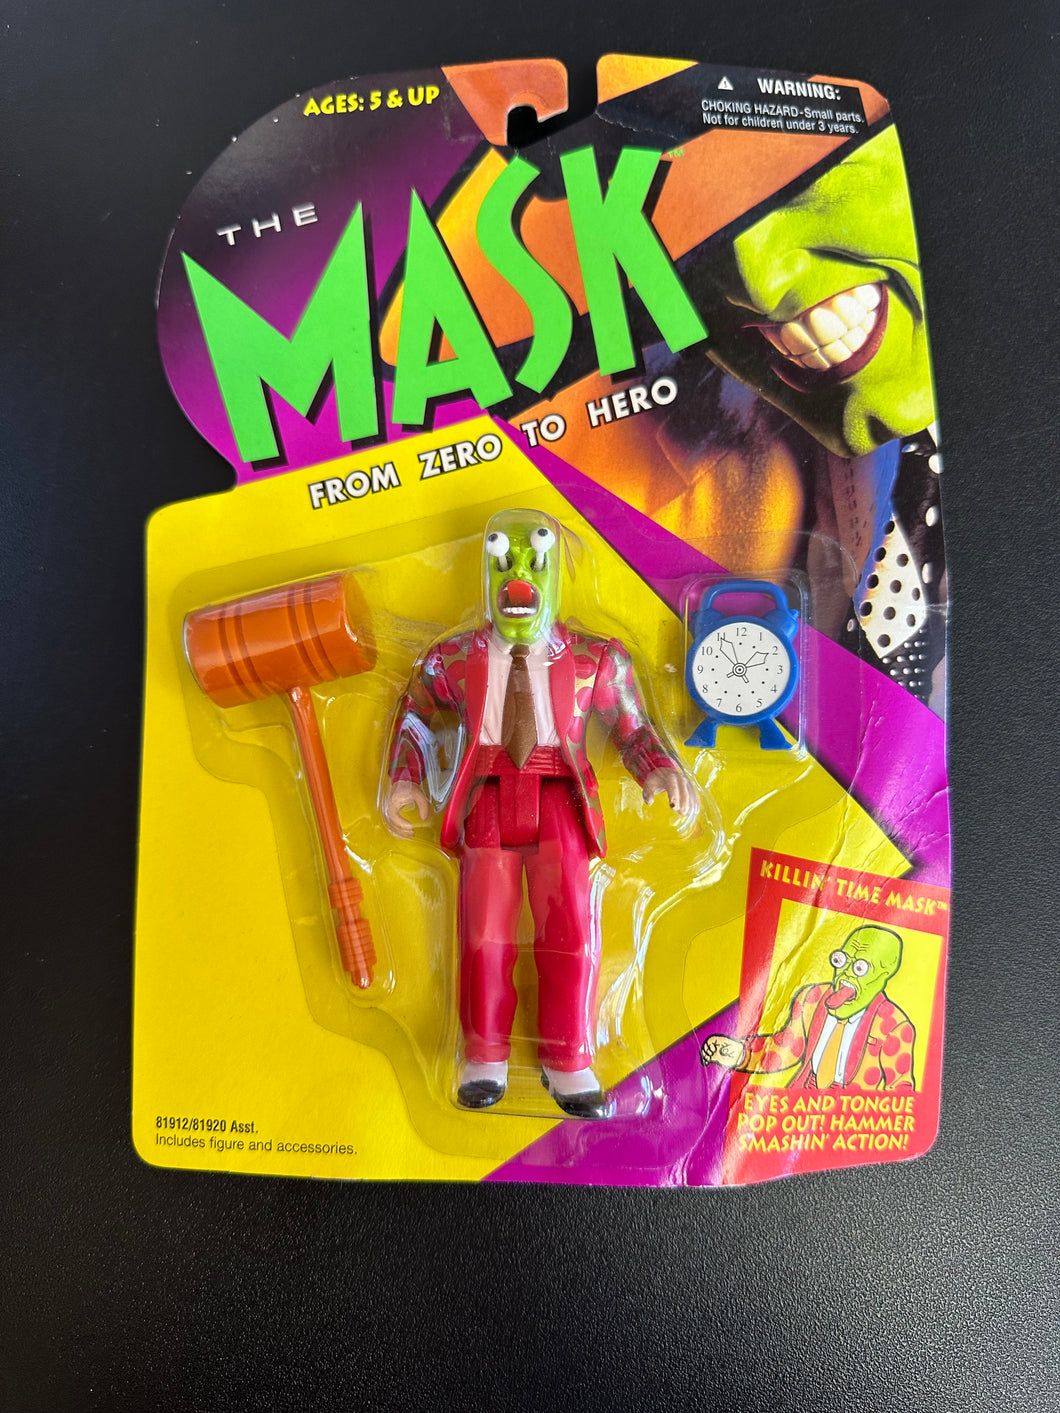 KENNER THE MASK FROM ZERO TO HERO KILLIN’ TIME MASK